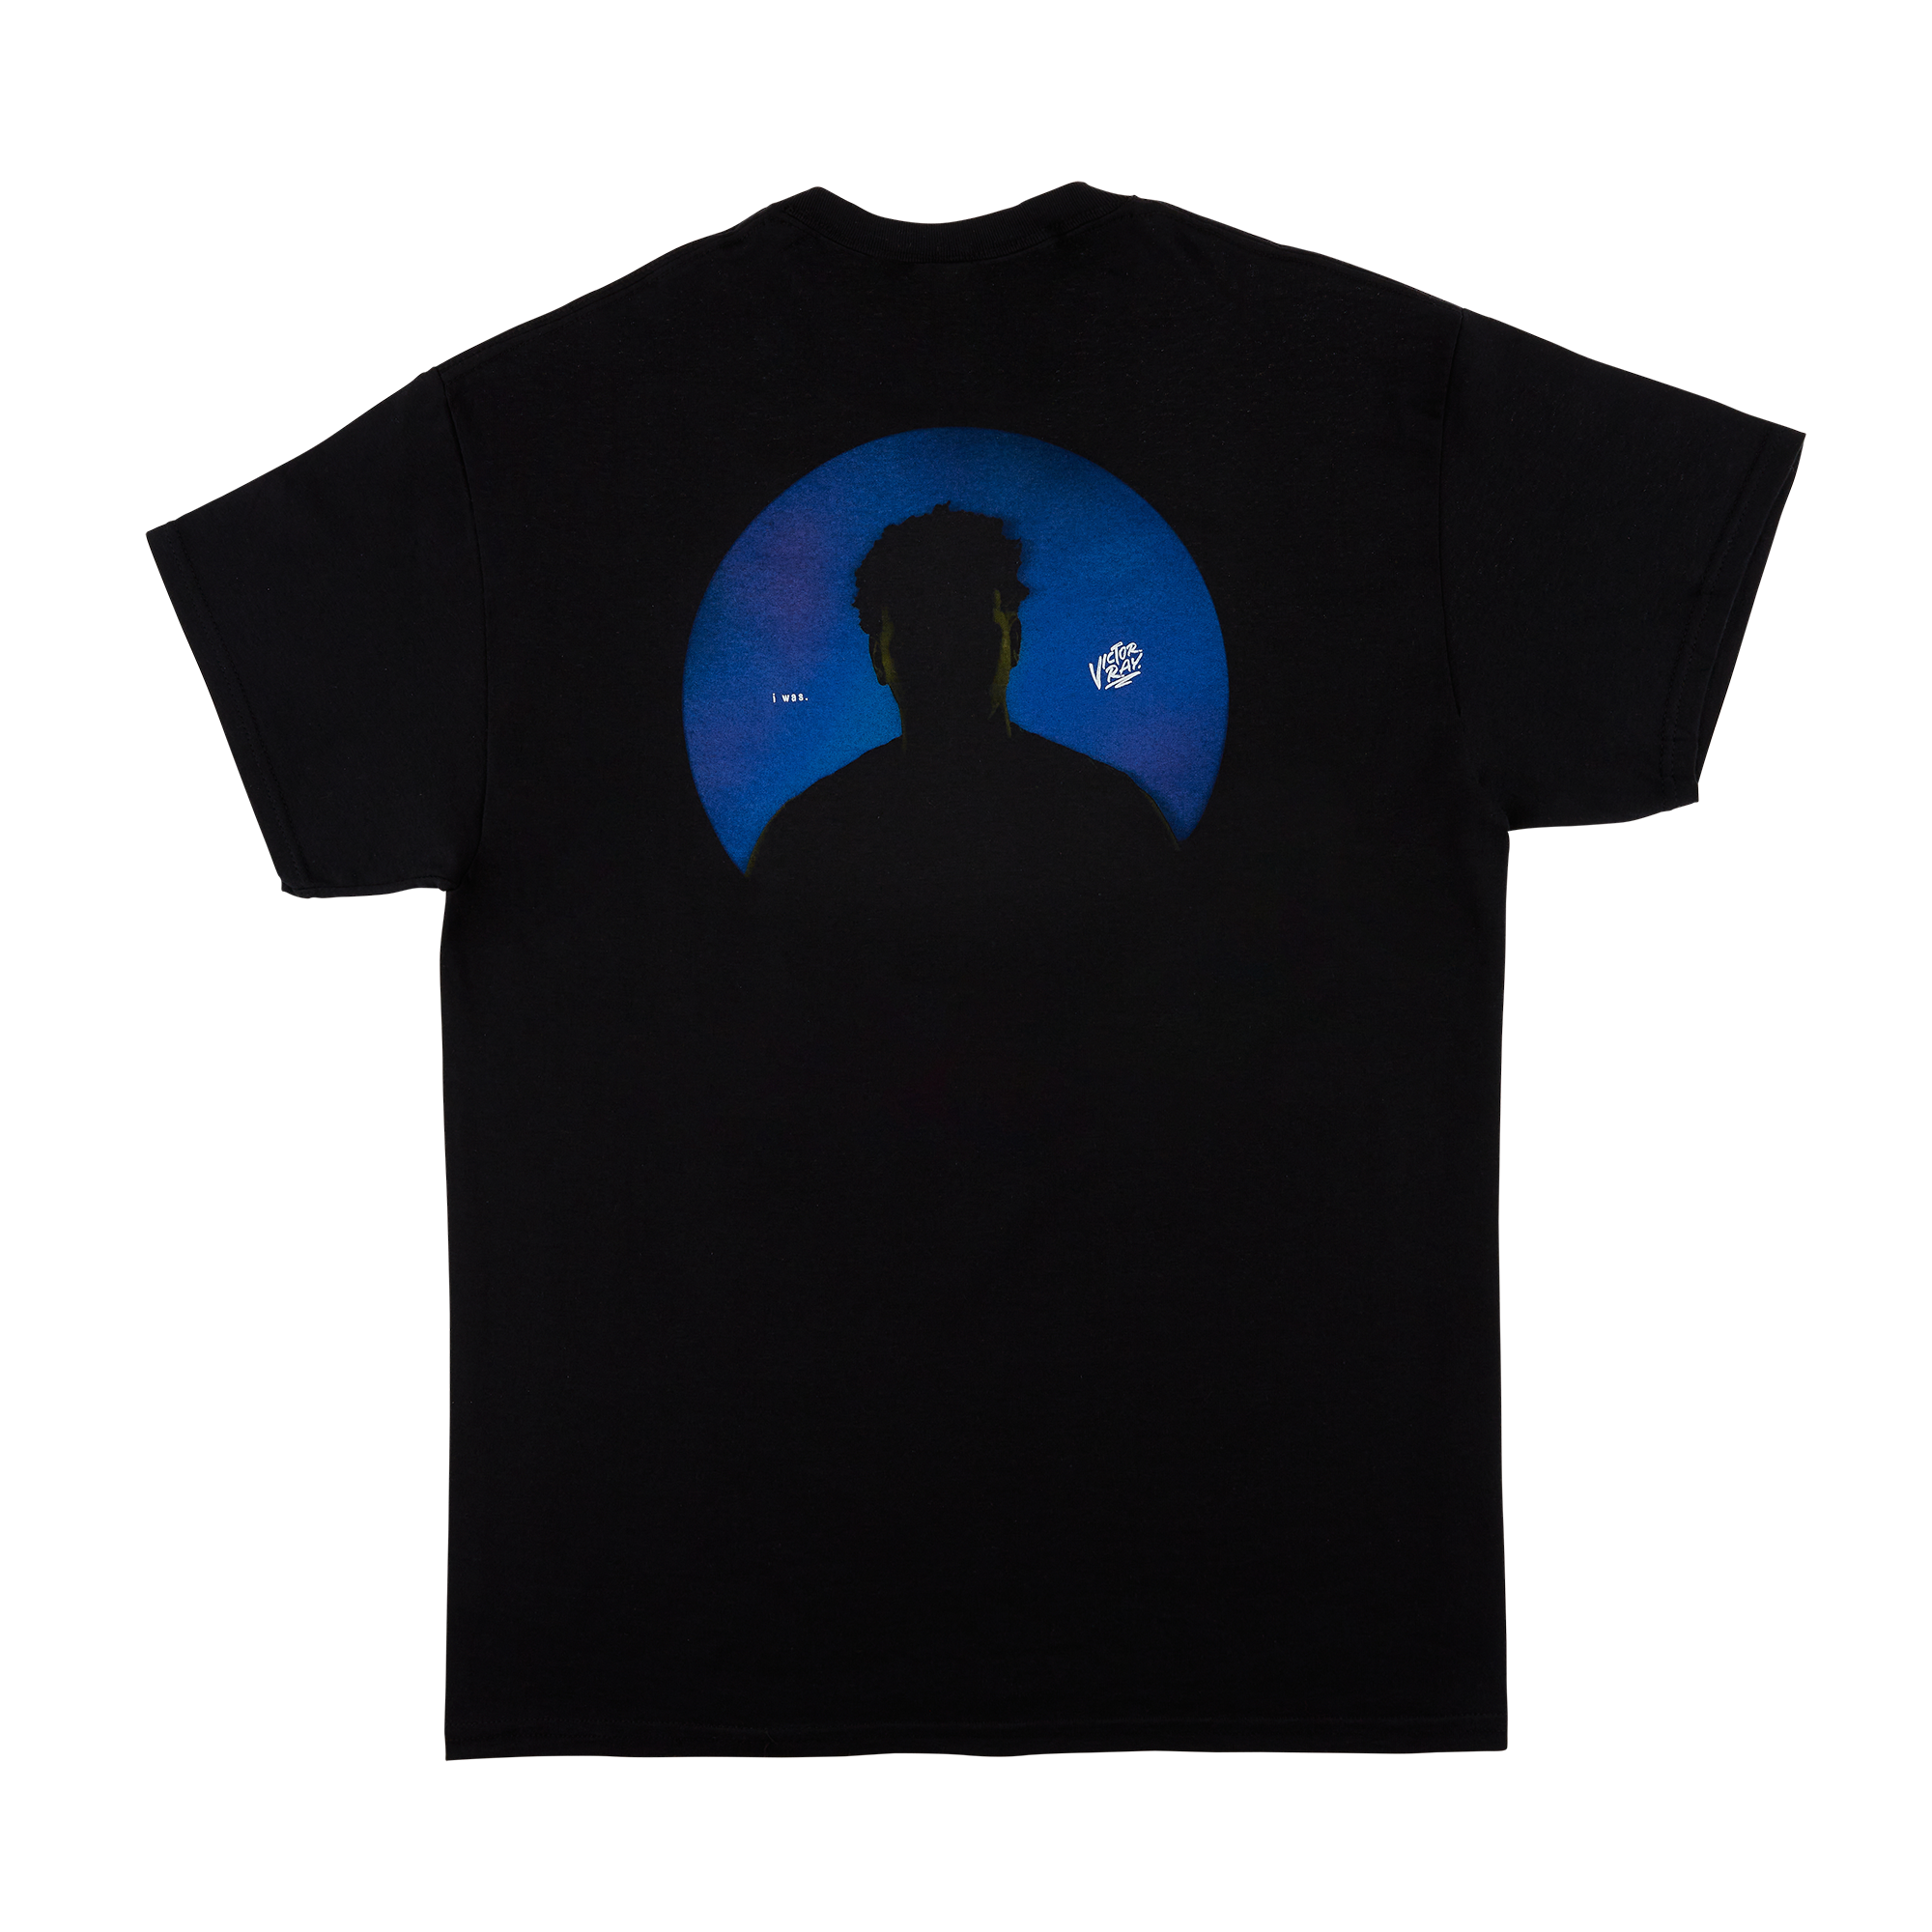 Victor Ray - 'i was.' EP T-shirt